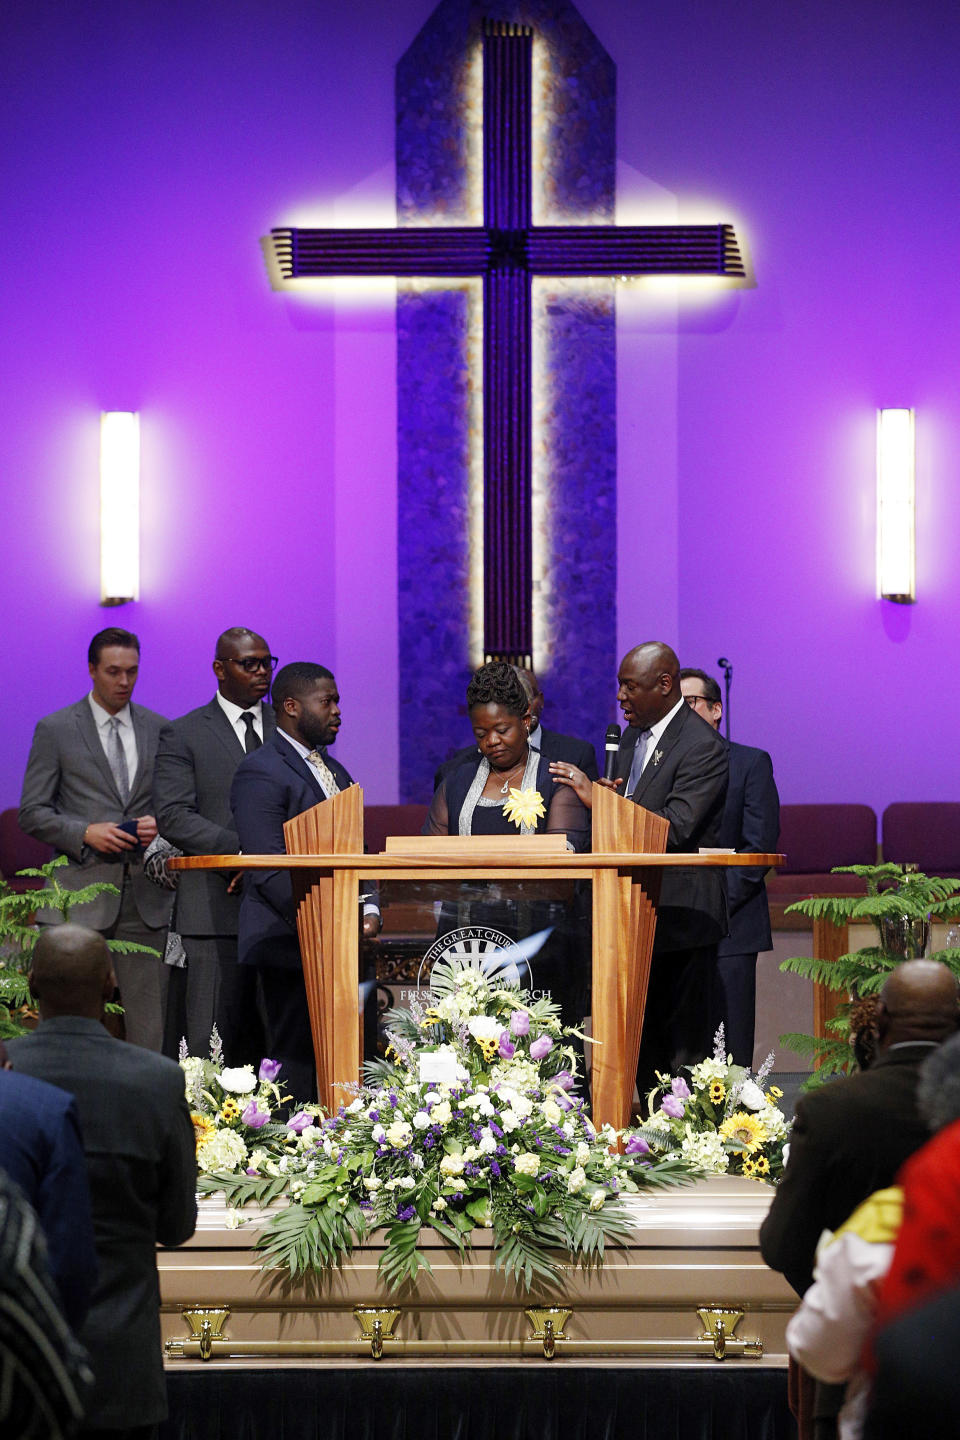 Leon Ochieng and Caroline Ouko, mother and older brother of Irvo Otieno, are seen with attorney Ben Crump during the celebration of life for Irvo Otieno at First Baptist Church in North Chesterfield, Va., on Wednesday, March 29, 2023. Irvo Otieno, a 28-year-old Black man, died after he was pinned to the floor by seven sheriff's deputies and several others while he was being admitted to a mental hospital. (Eva Russo/Richmond Times-Dispatch via AP)